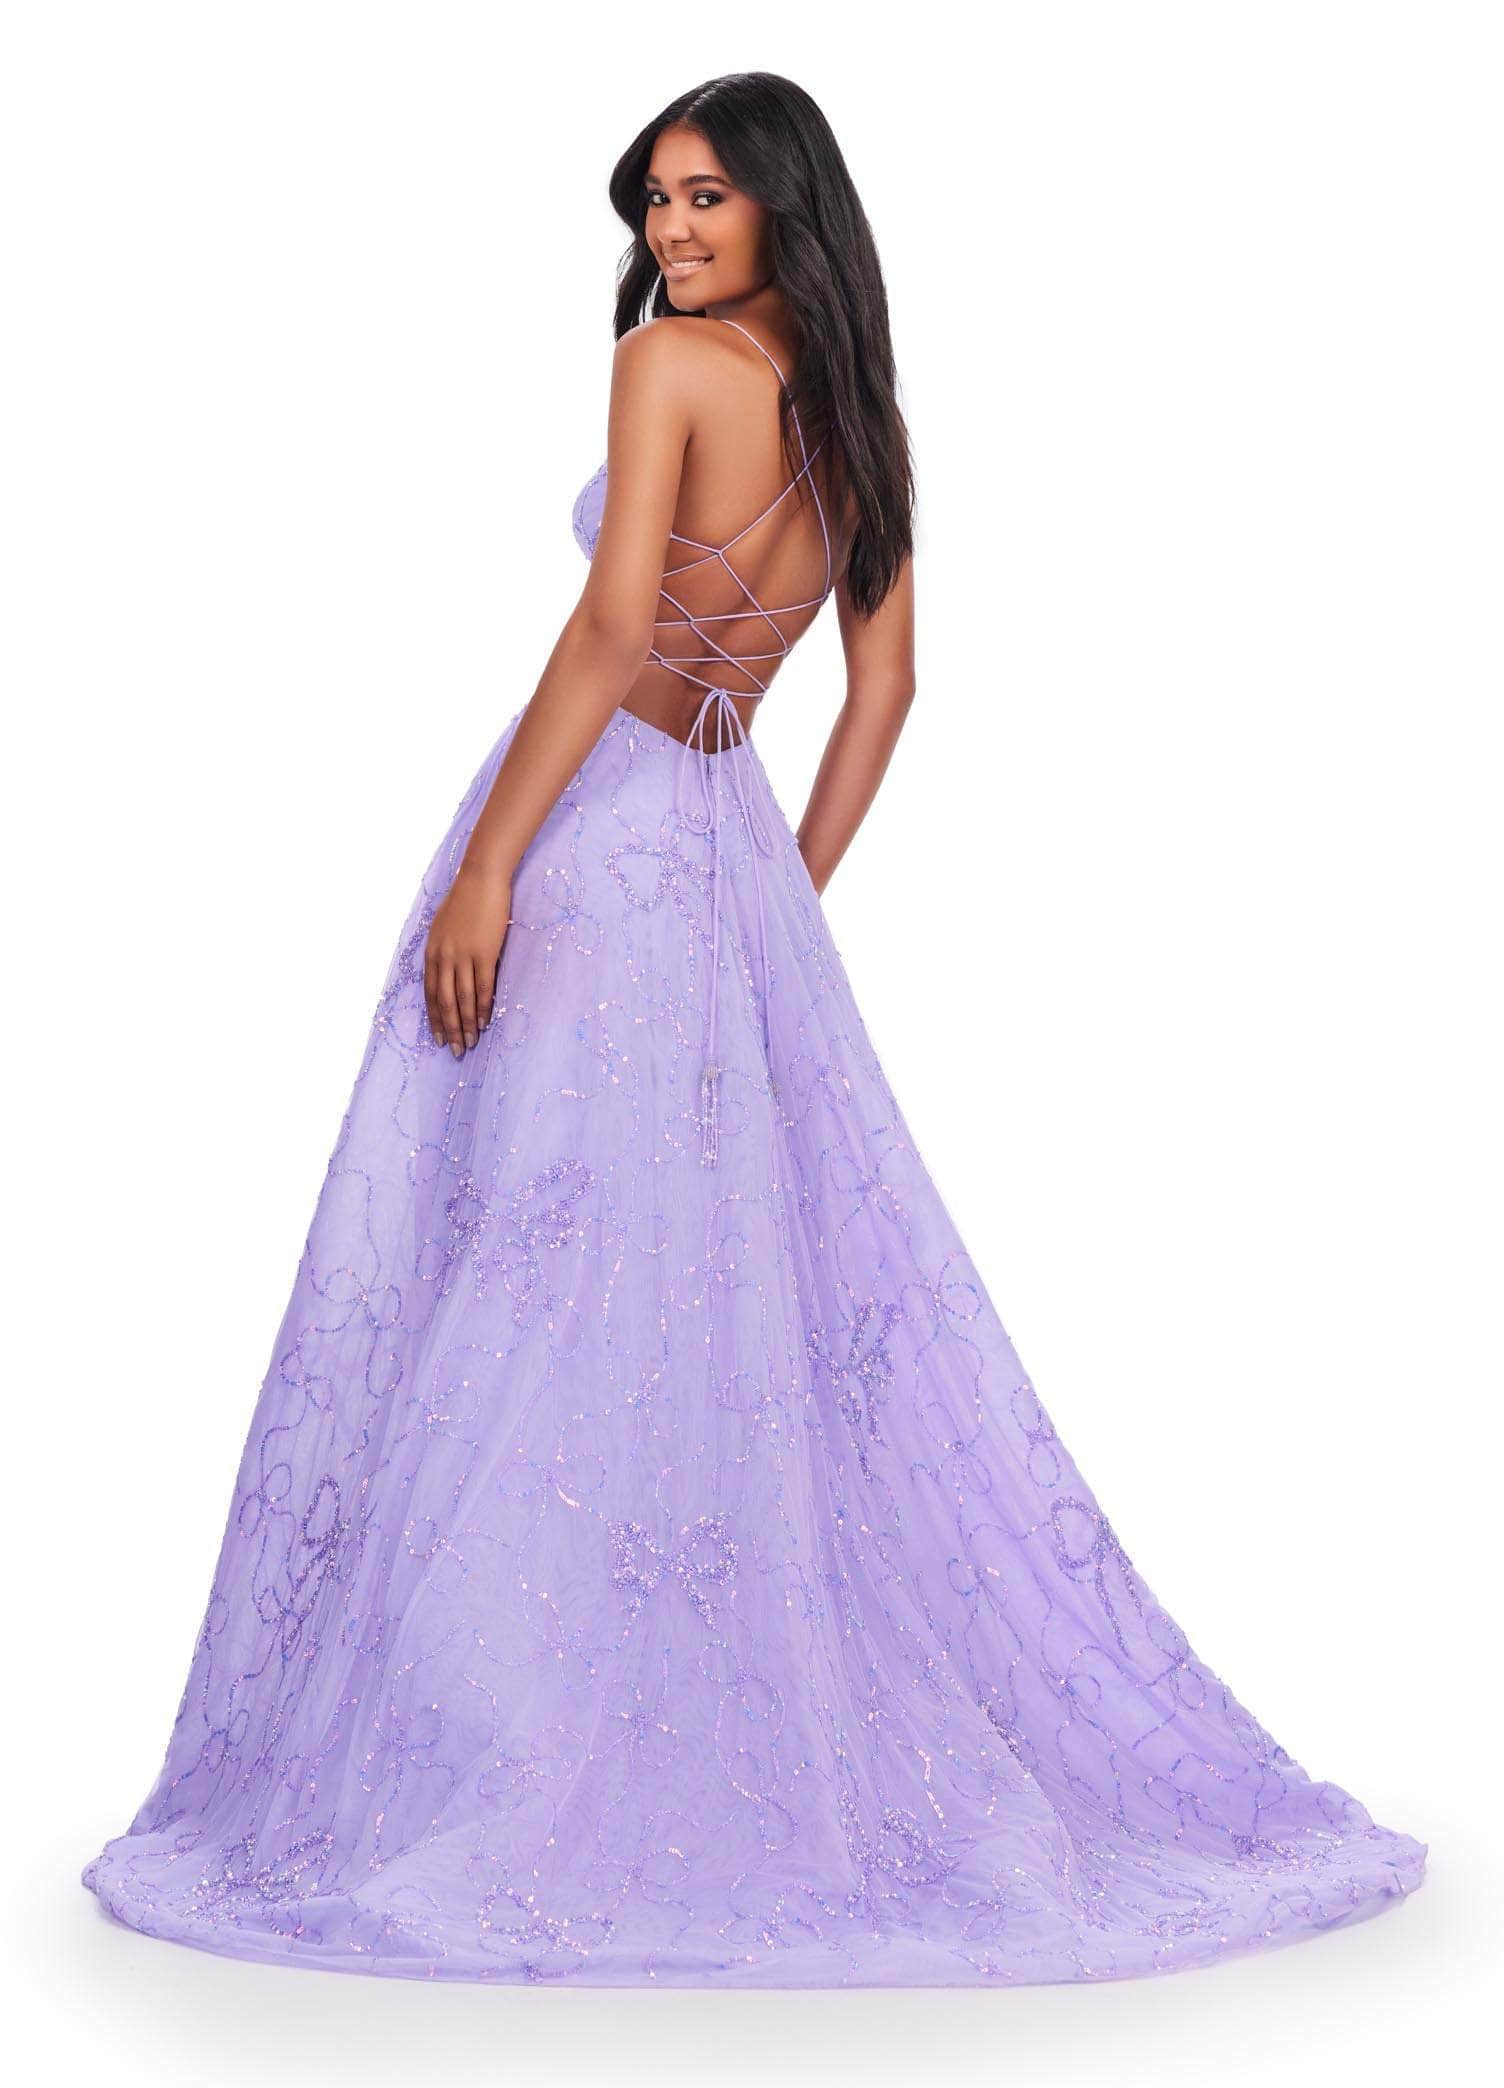 Image of Ashley Lauren 11658 - Spaghetti Strap A-Line Evening Gown